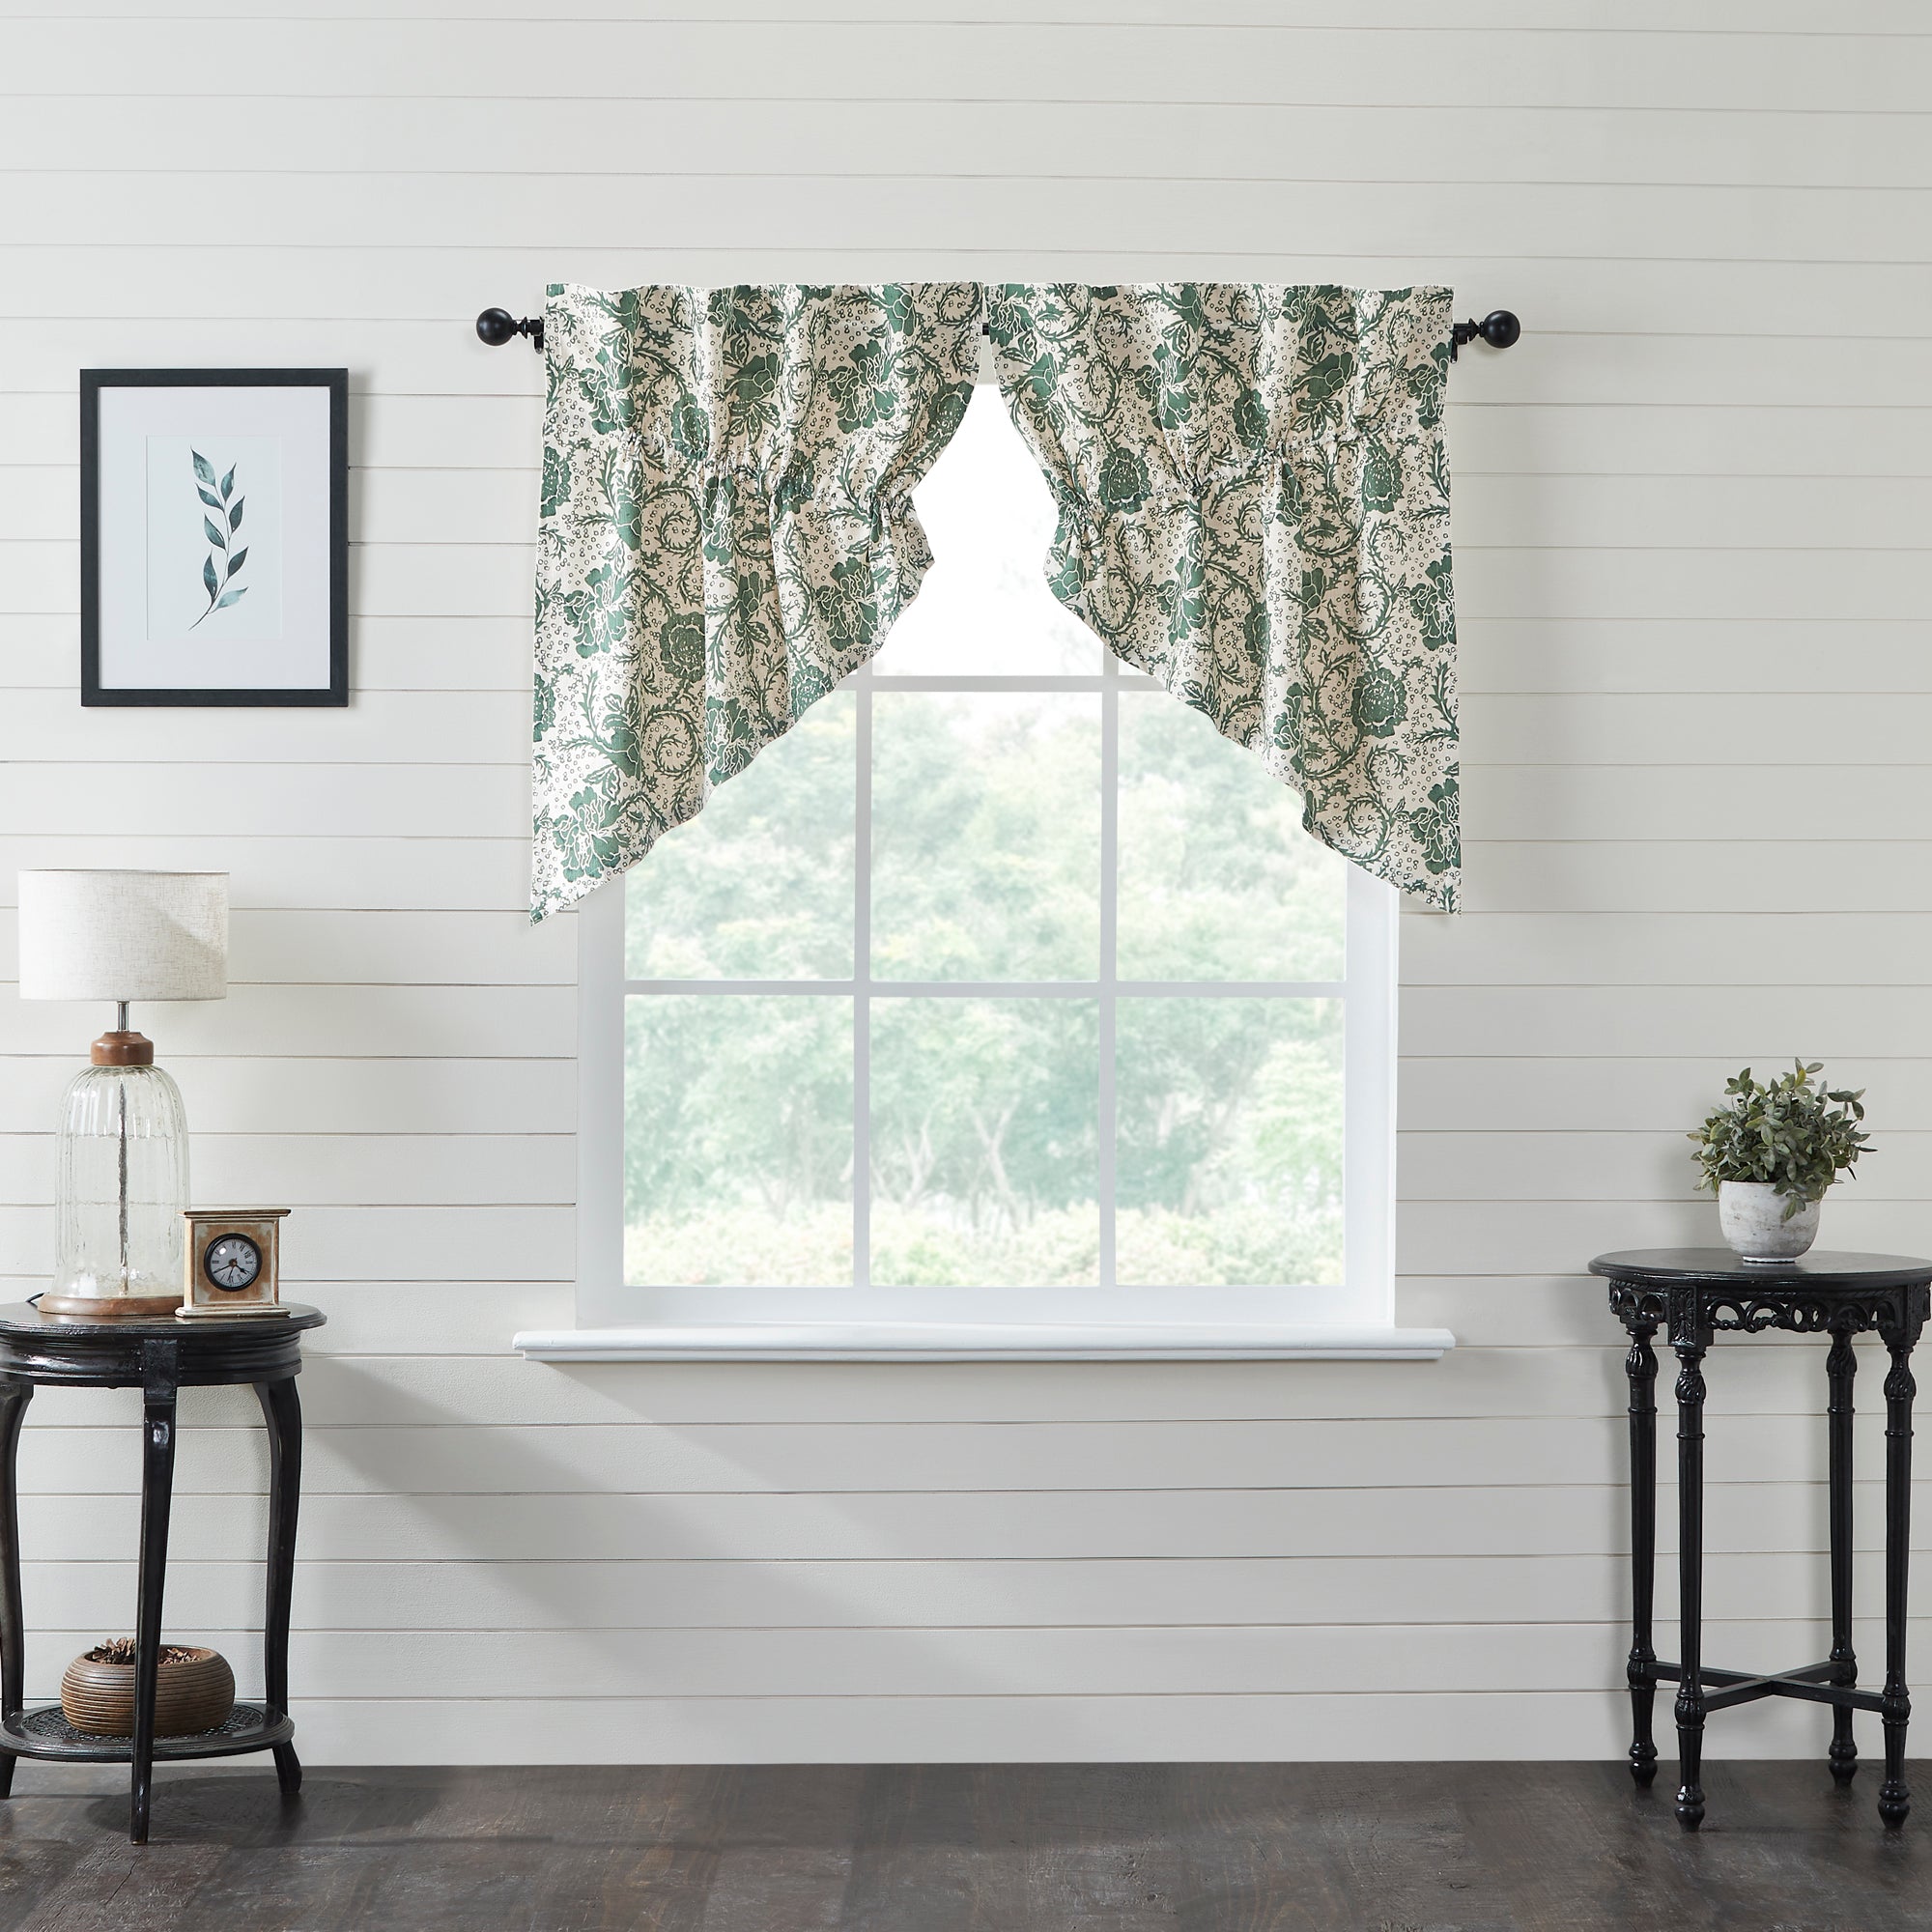 April & Olive Dorset Green Floral Prairie Swag Set of 2 36x36x18 By VHC Brands